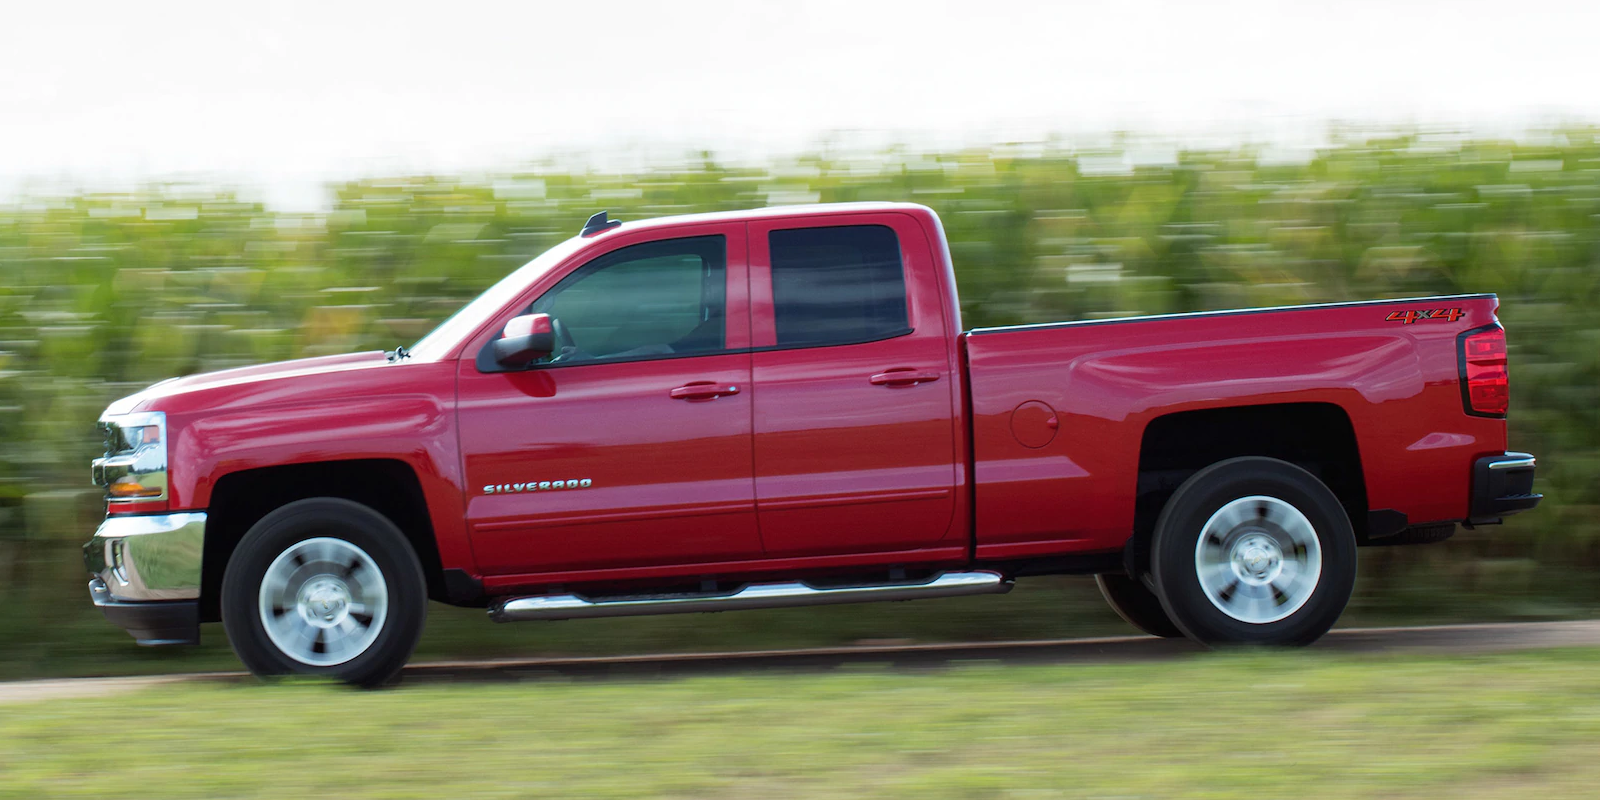 2019 Chevrolet Silverado 1500 Red Exterior Side Profile Picture.png